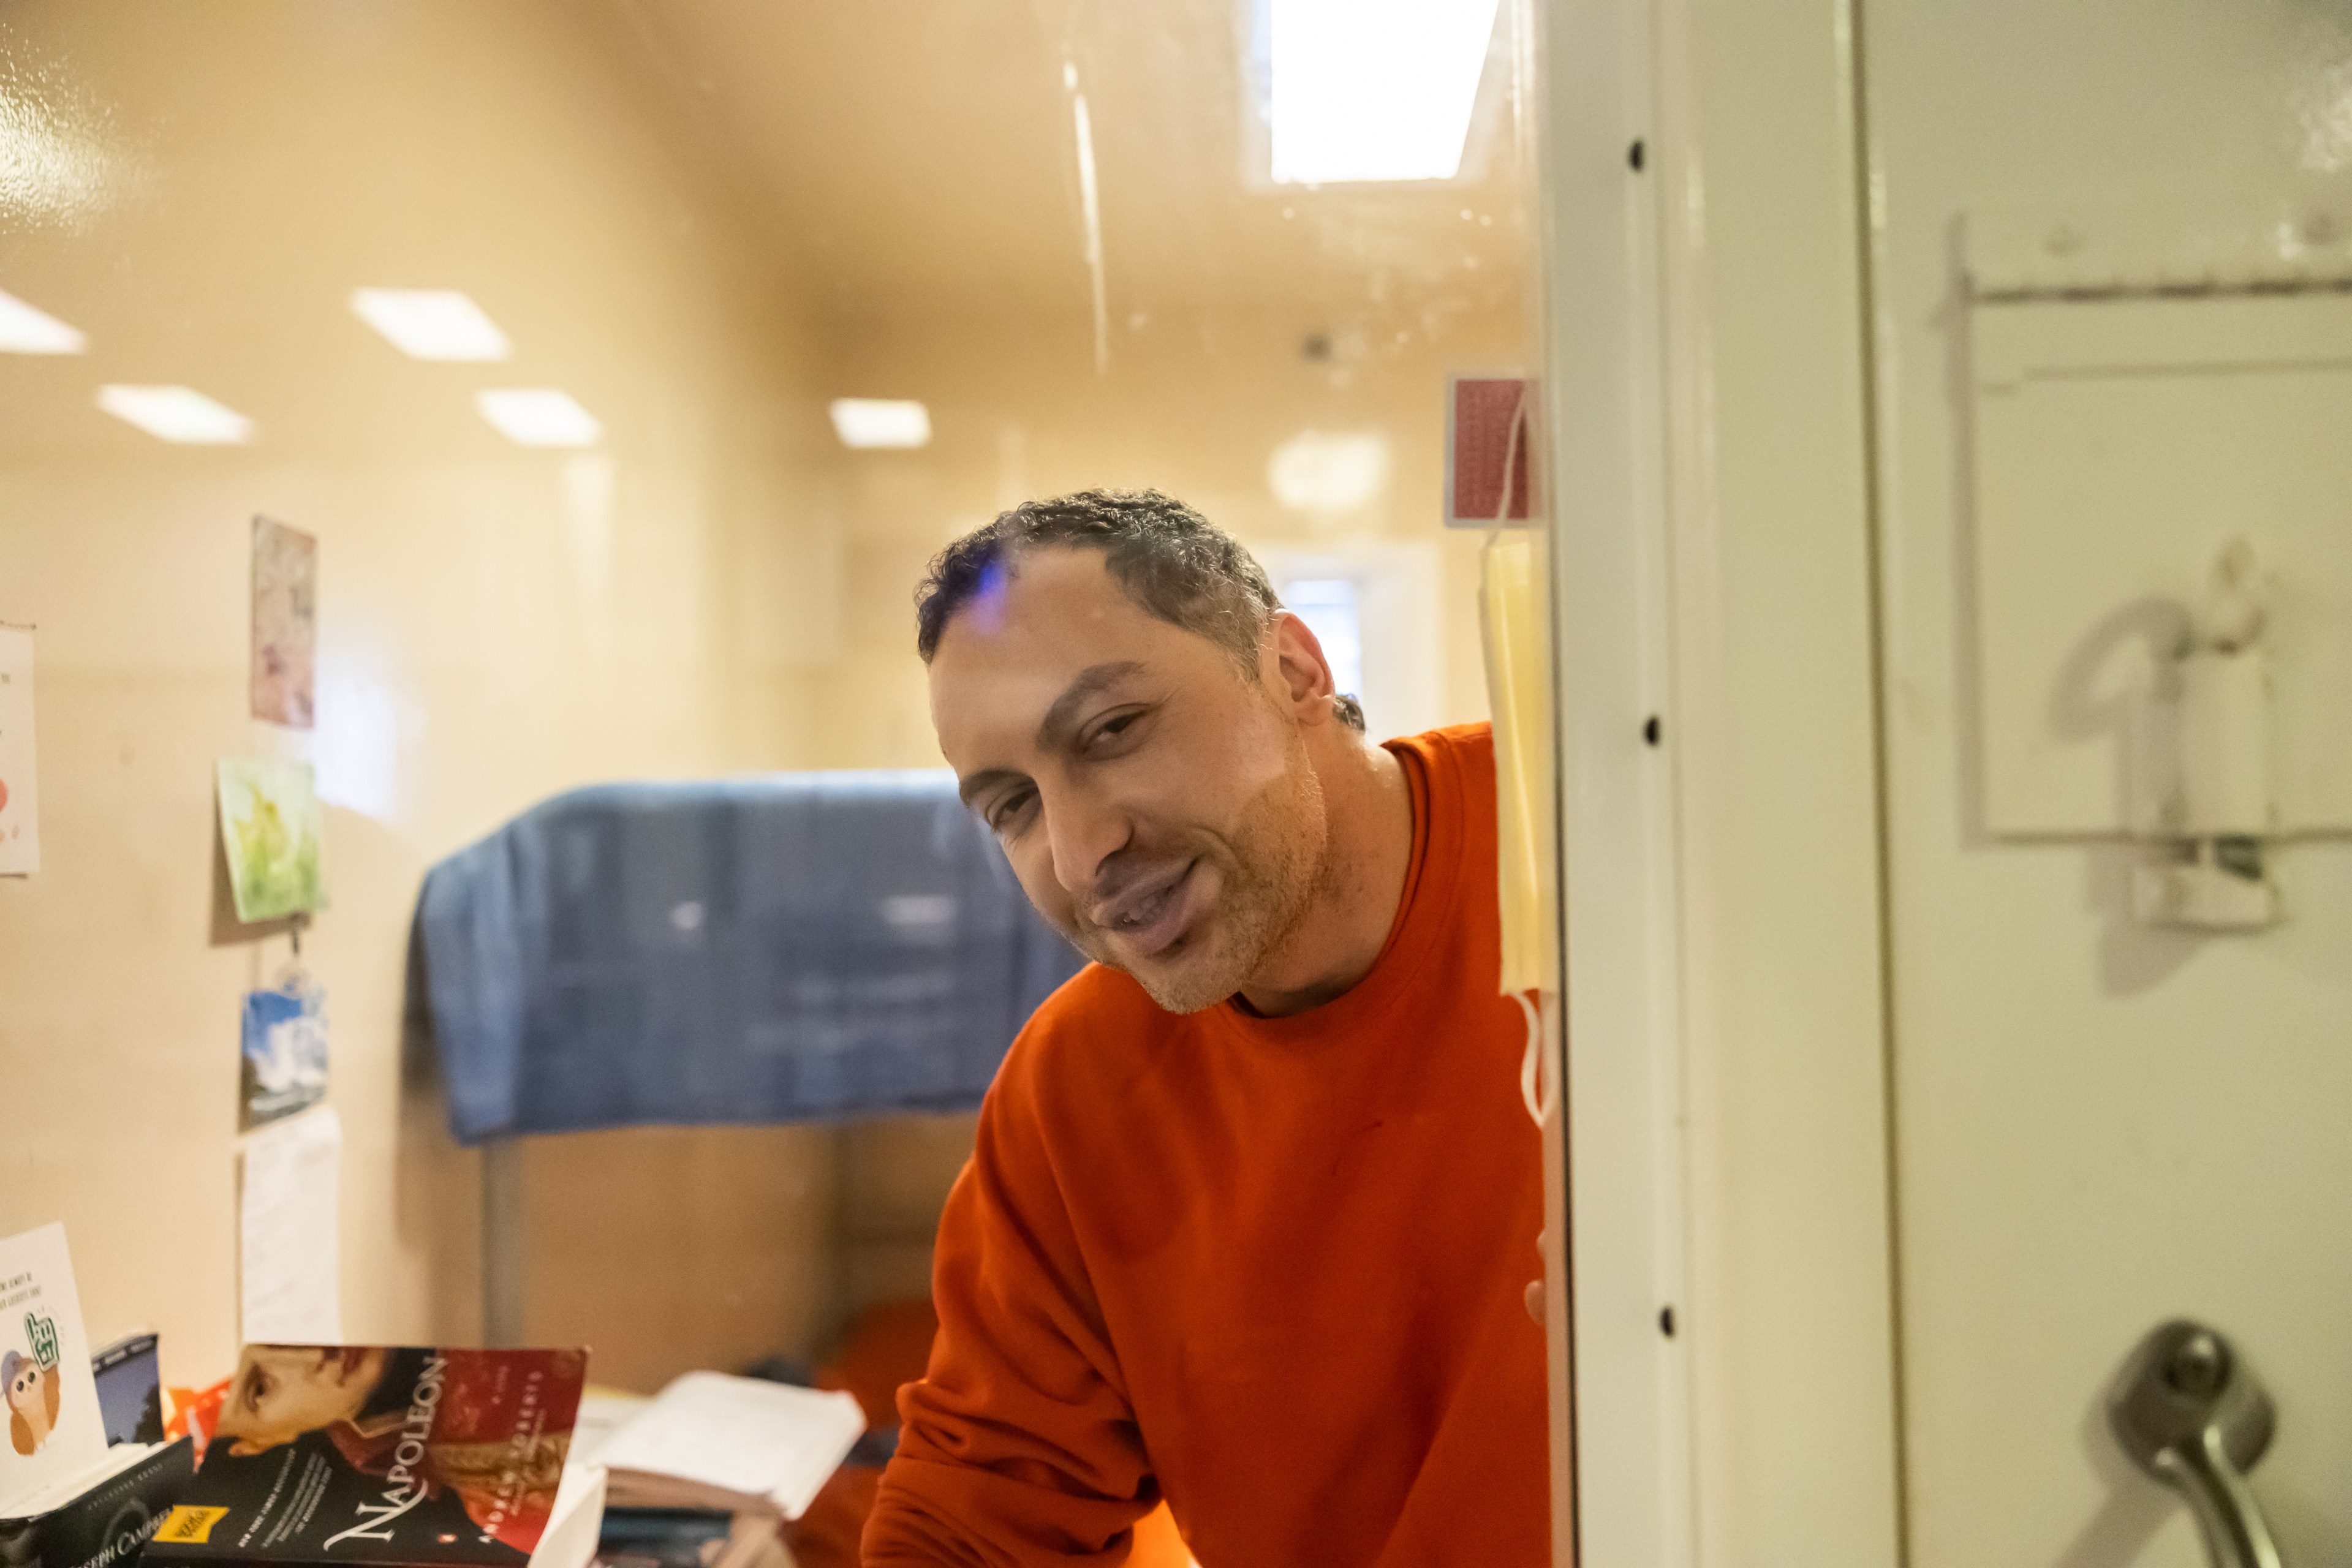 Jail inmate Nima Momeni, a suspect in the killing of Cash App founder Bob Lee, smiles while dressed in an orange sweatshirt looking out the window of his jail cell.